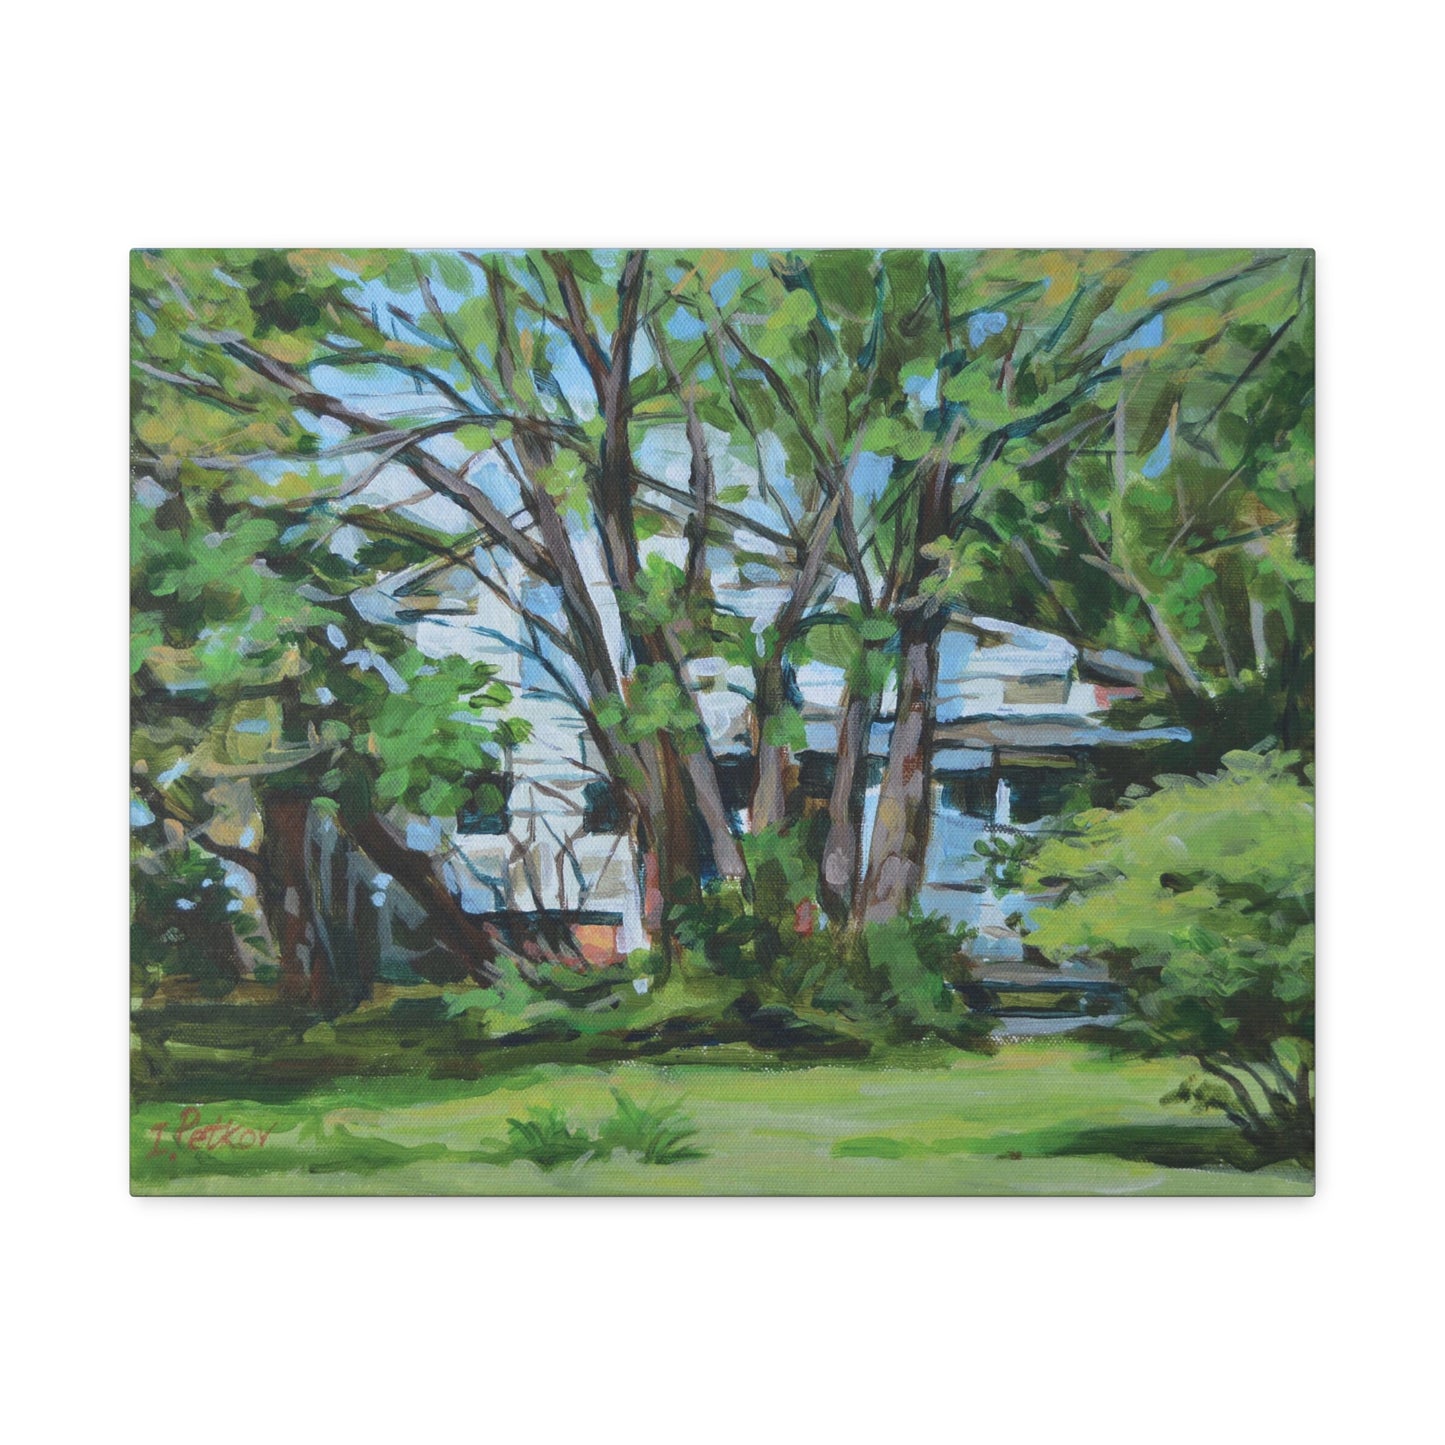 White House Amid Green - Canvas Print, Wall Art, Oil Painting, American Landscape